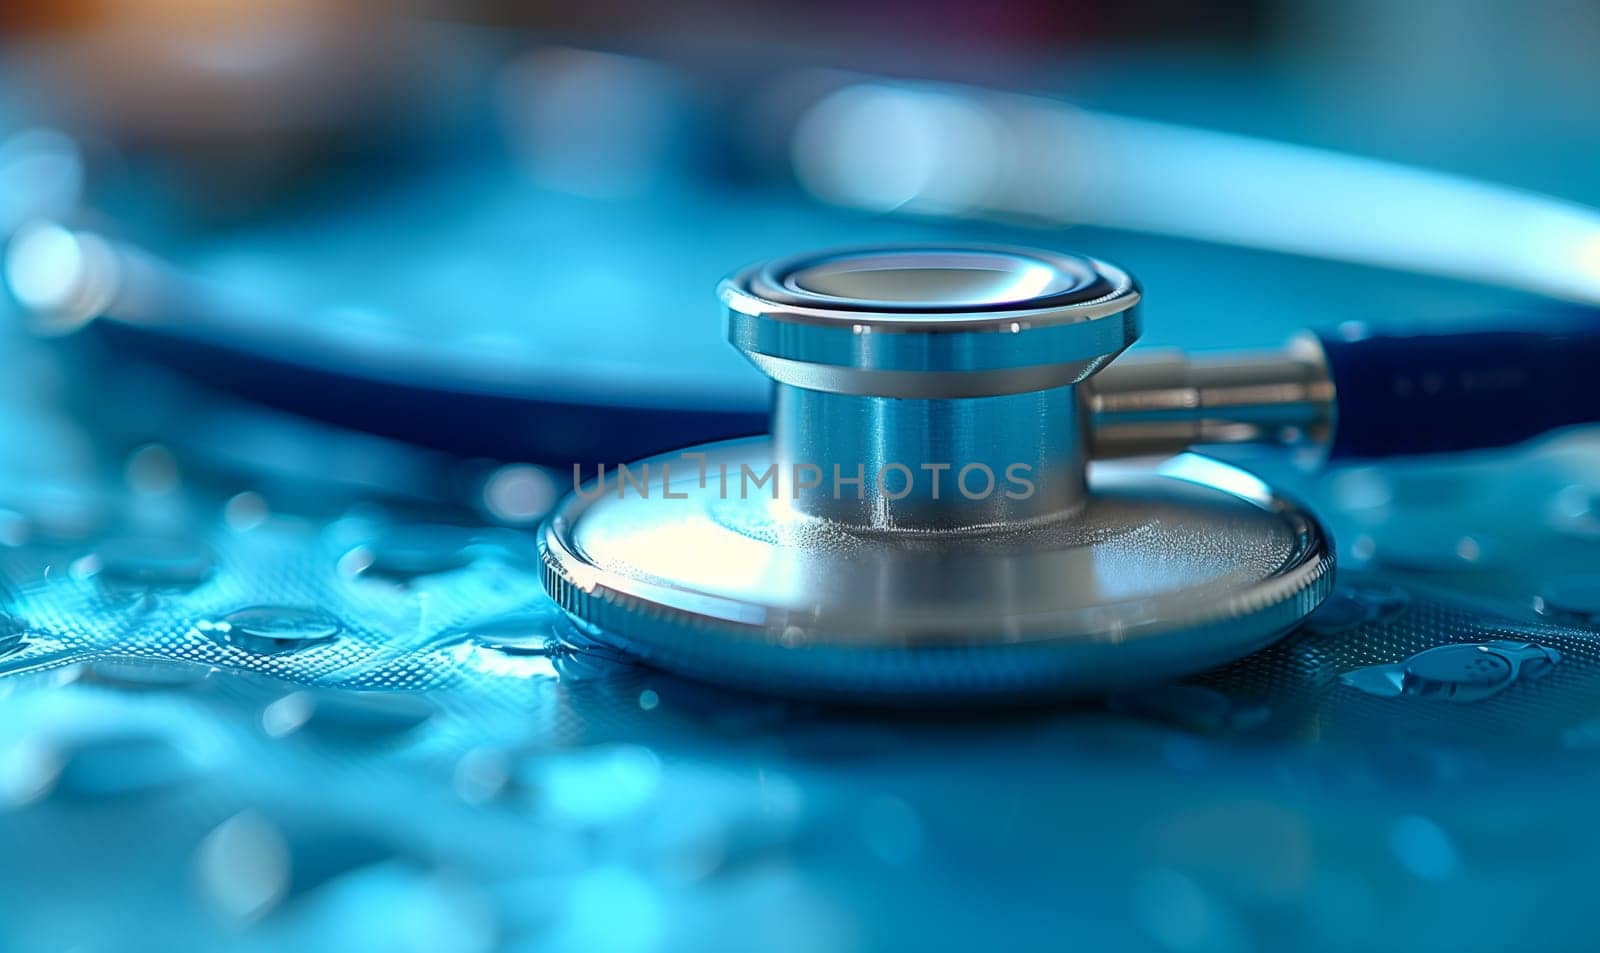 A macro photography shot of a stethoscope on an electric blue surface, resembling a piece of jewellery. The circle shape and metal material add a touch of fashion to this medical tool